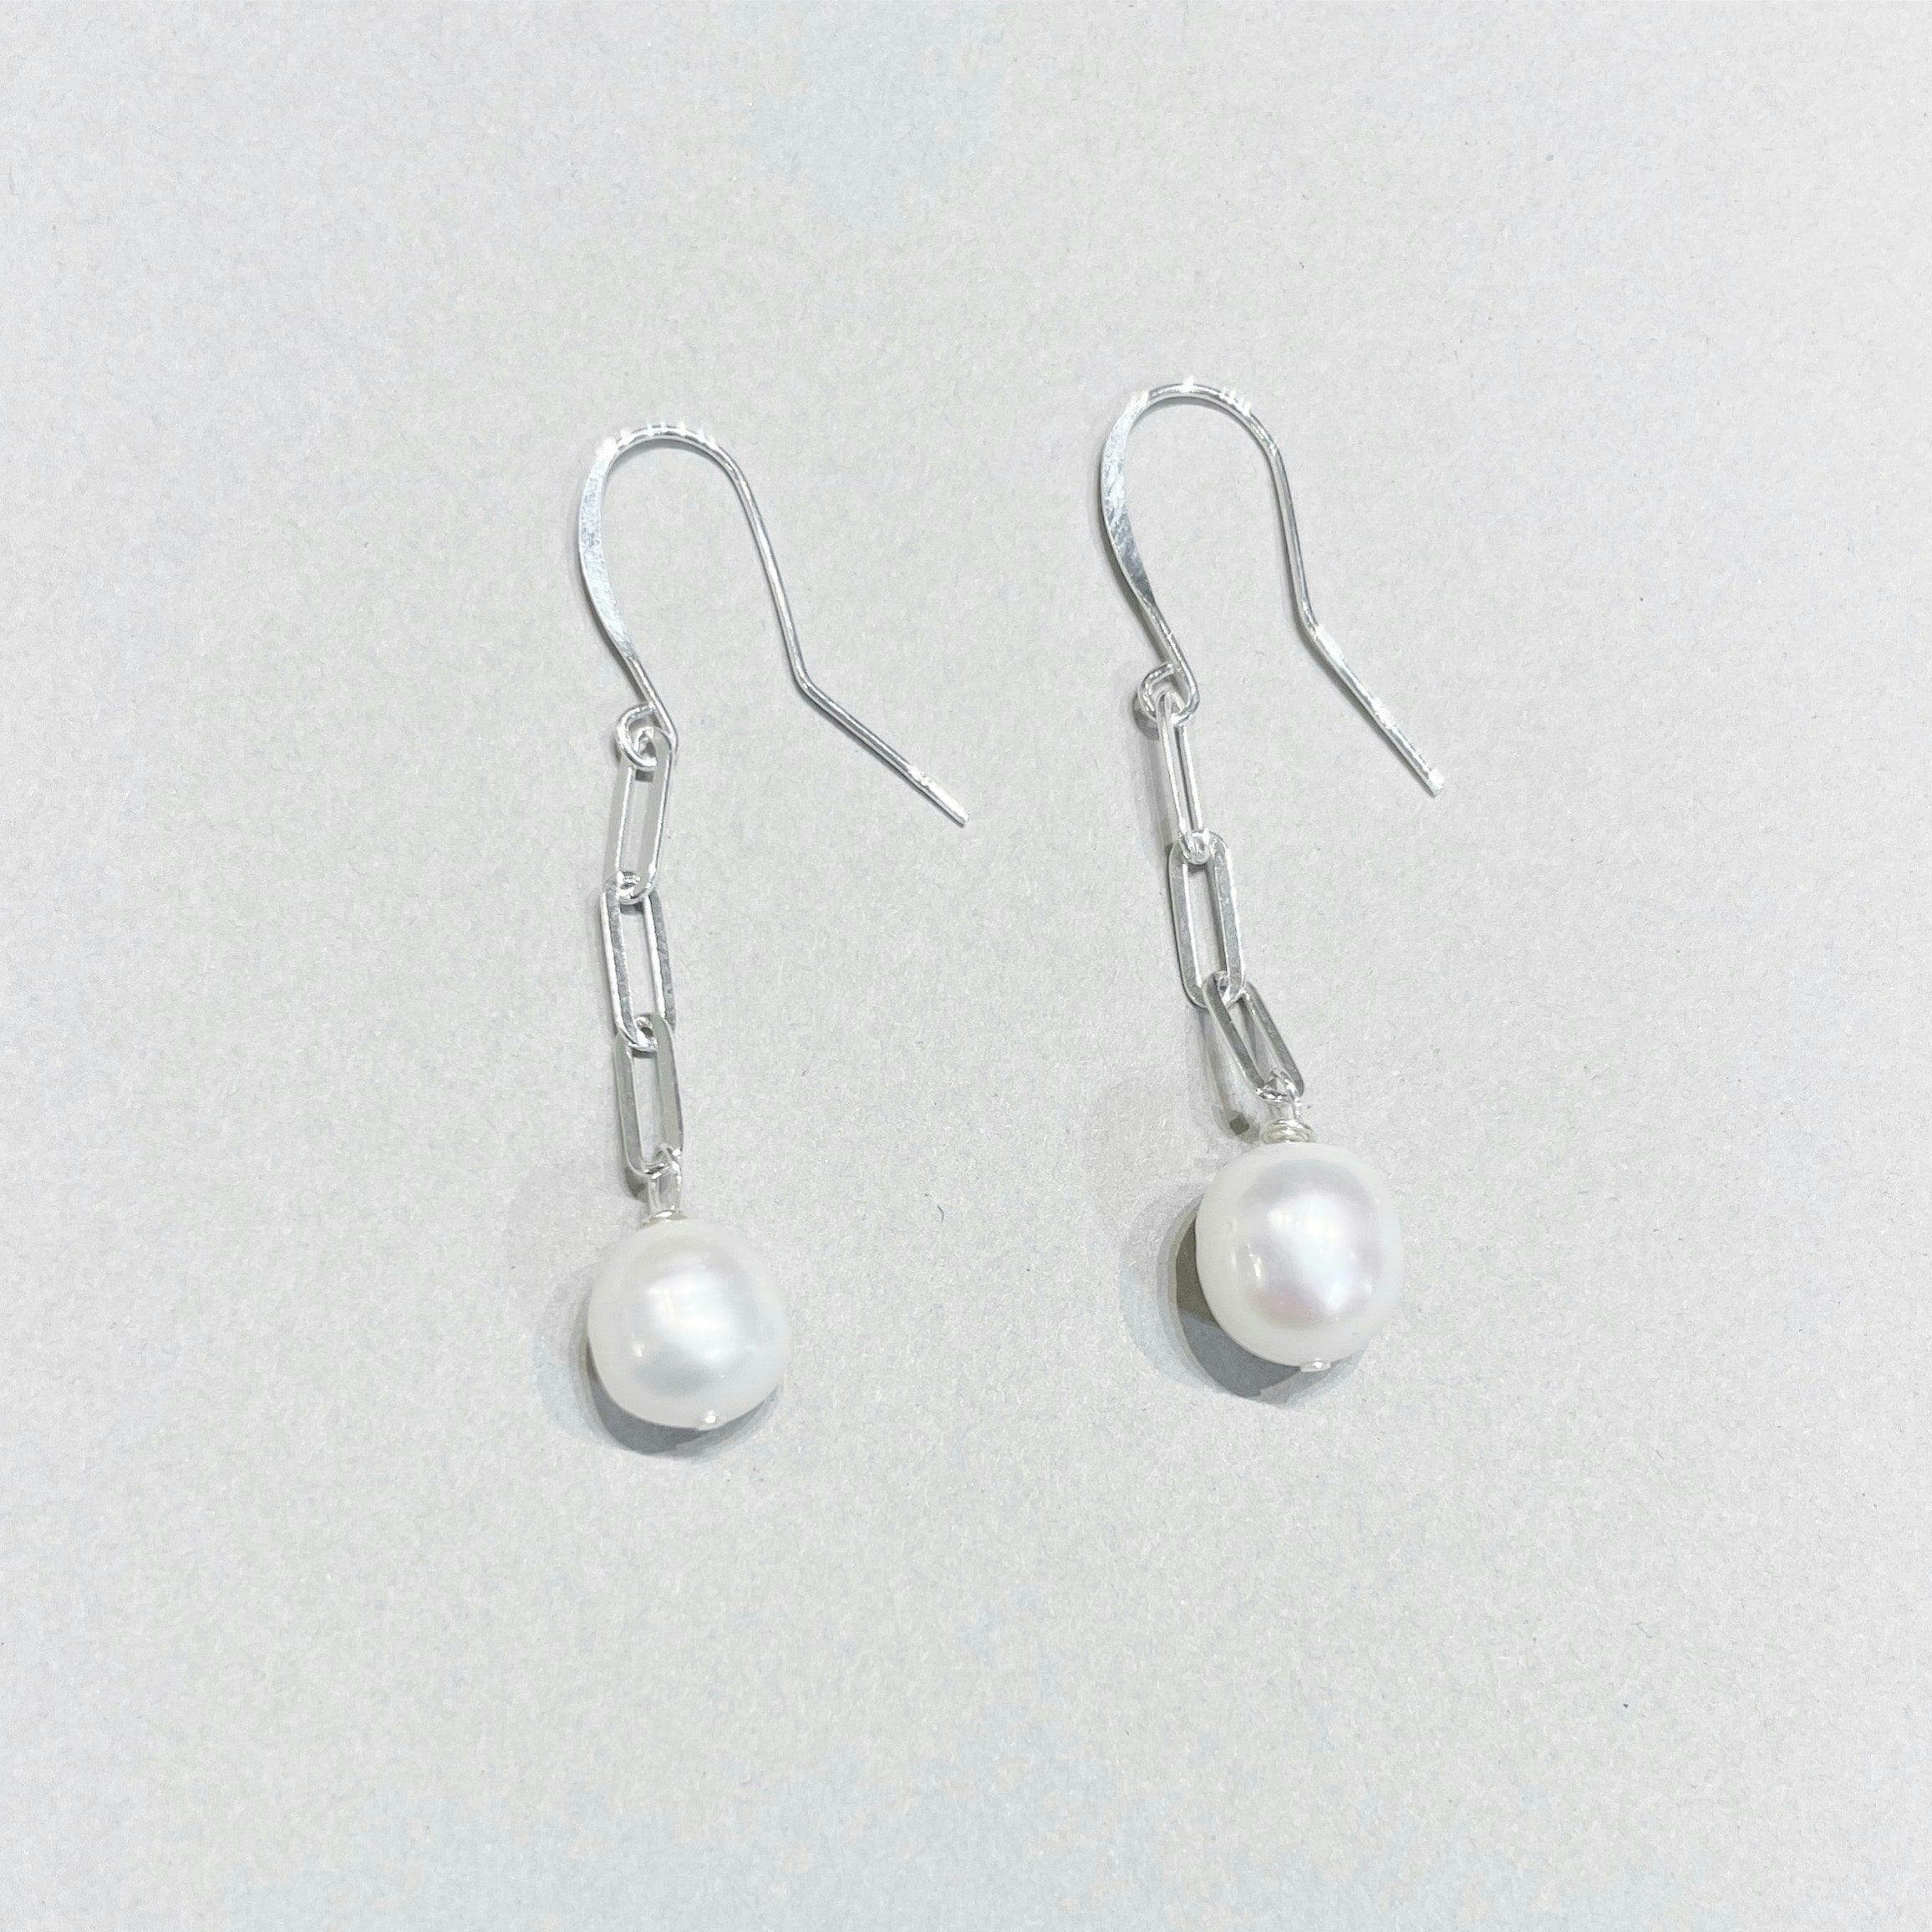 Iris Short Earrings, a product by Jenny Greco Jewellery